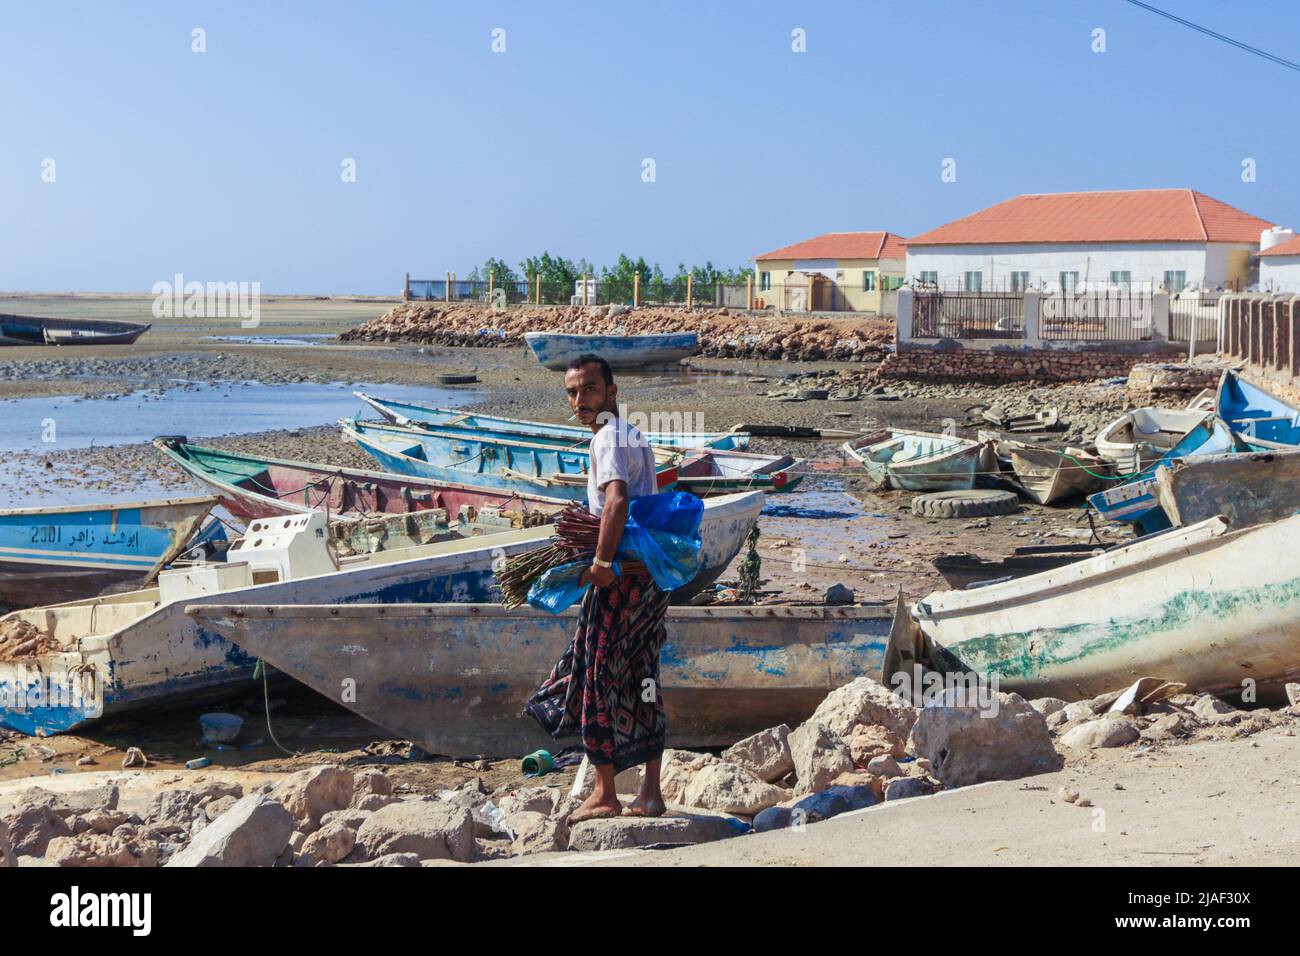 Local people on the Berbera streets Stock Photo